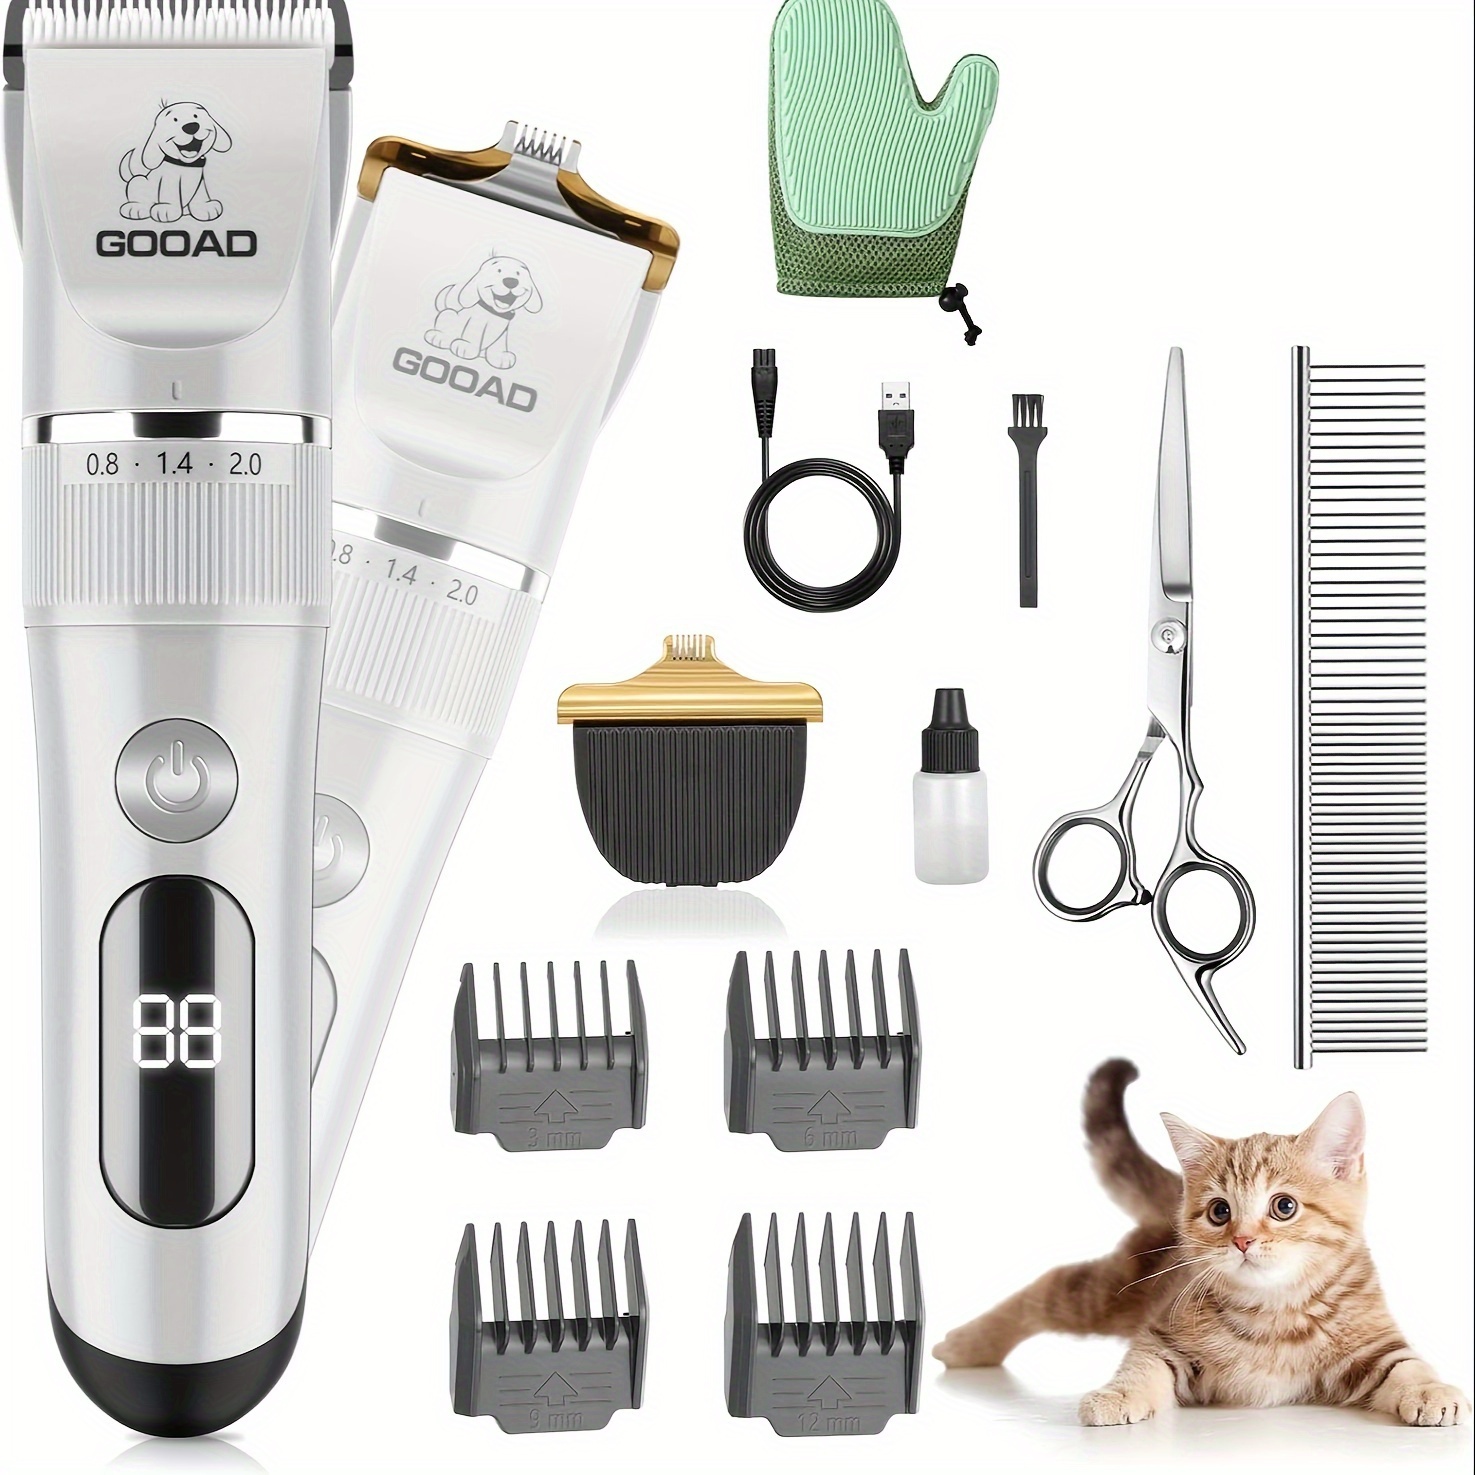 

Gooad Cat Grooming Kit Cat Clippers For Matted Hair Cordless Cat Shaver For Long Hair Low Noise Paw Trimmer, Cat Hair Trimmer For Grooming Quiet Pet Hair Clippers Tools For Cats Dogs (silver)